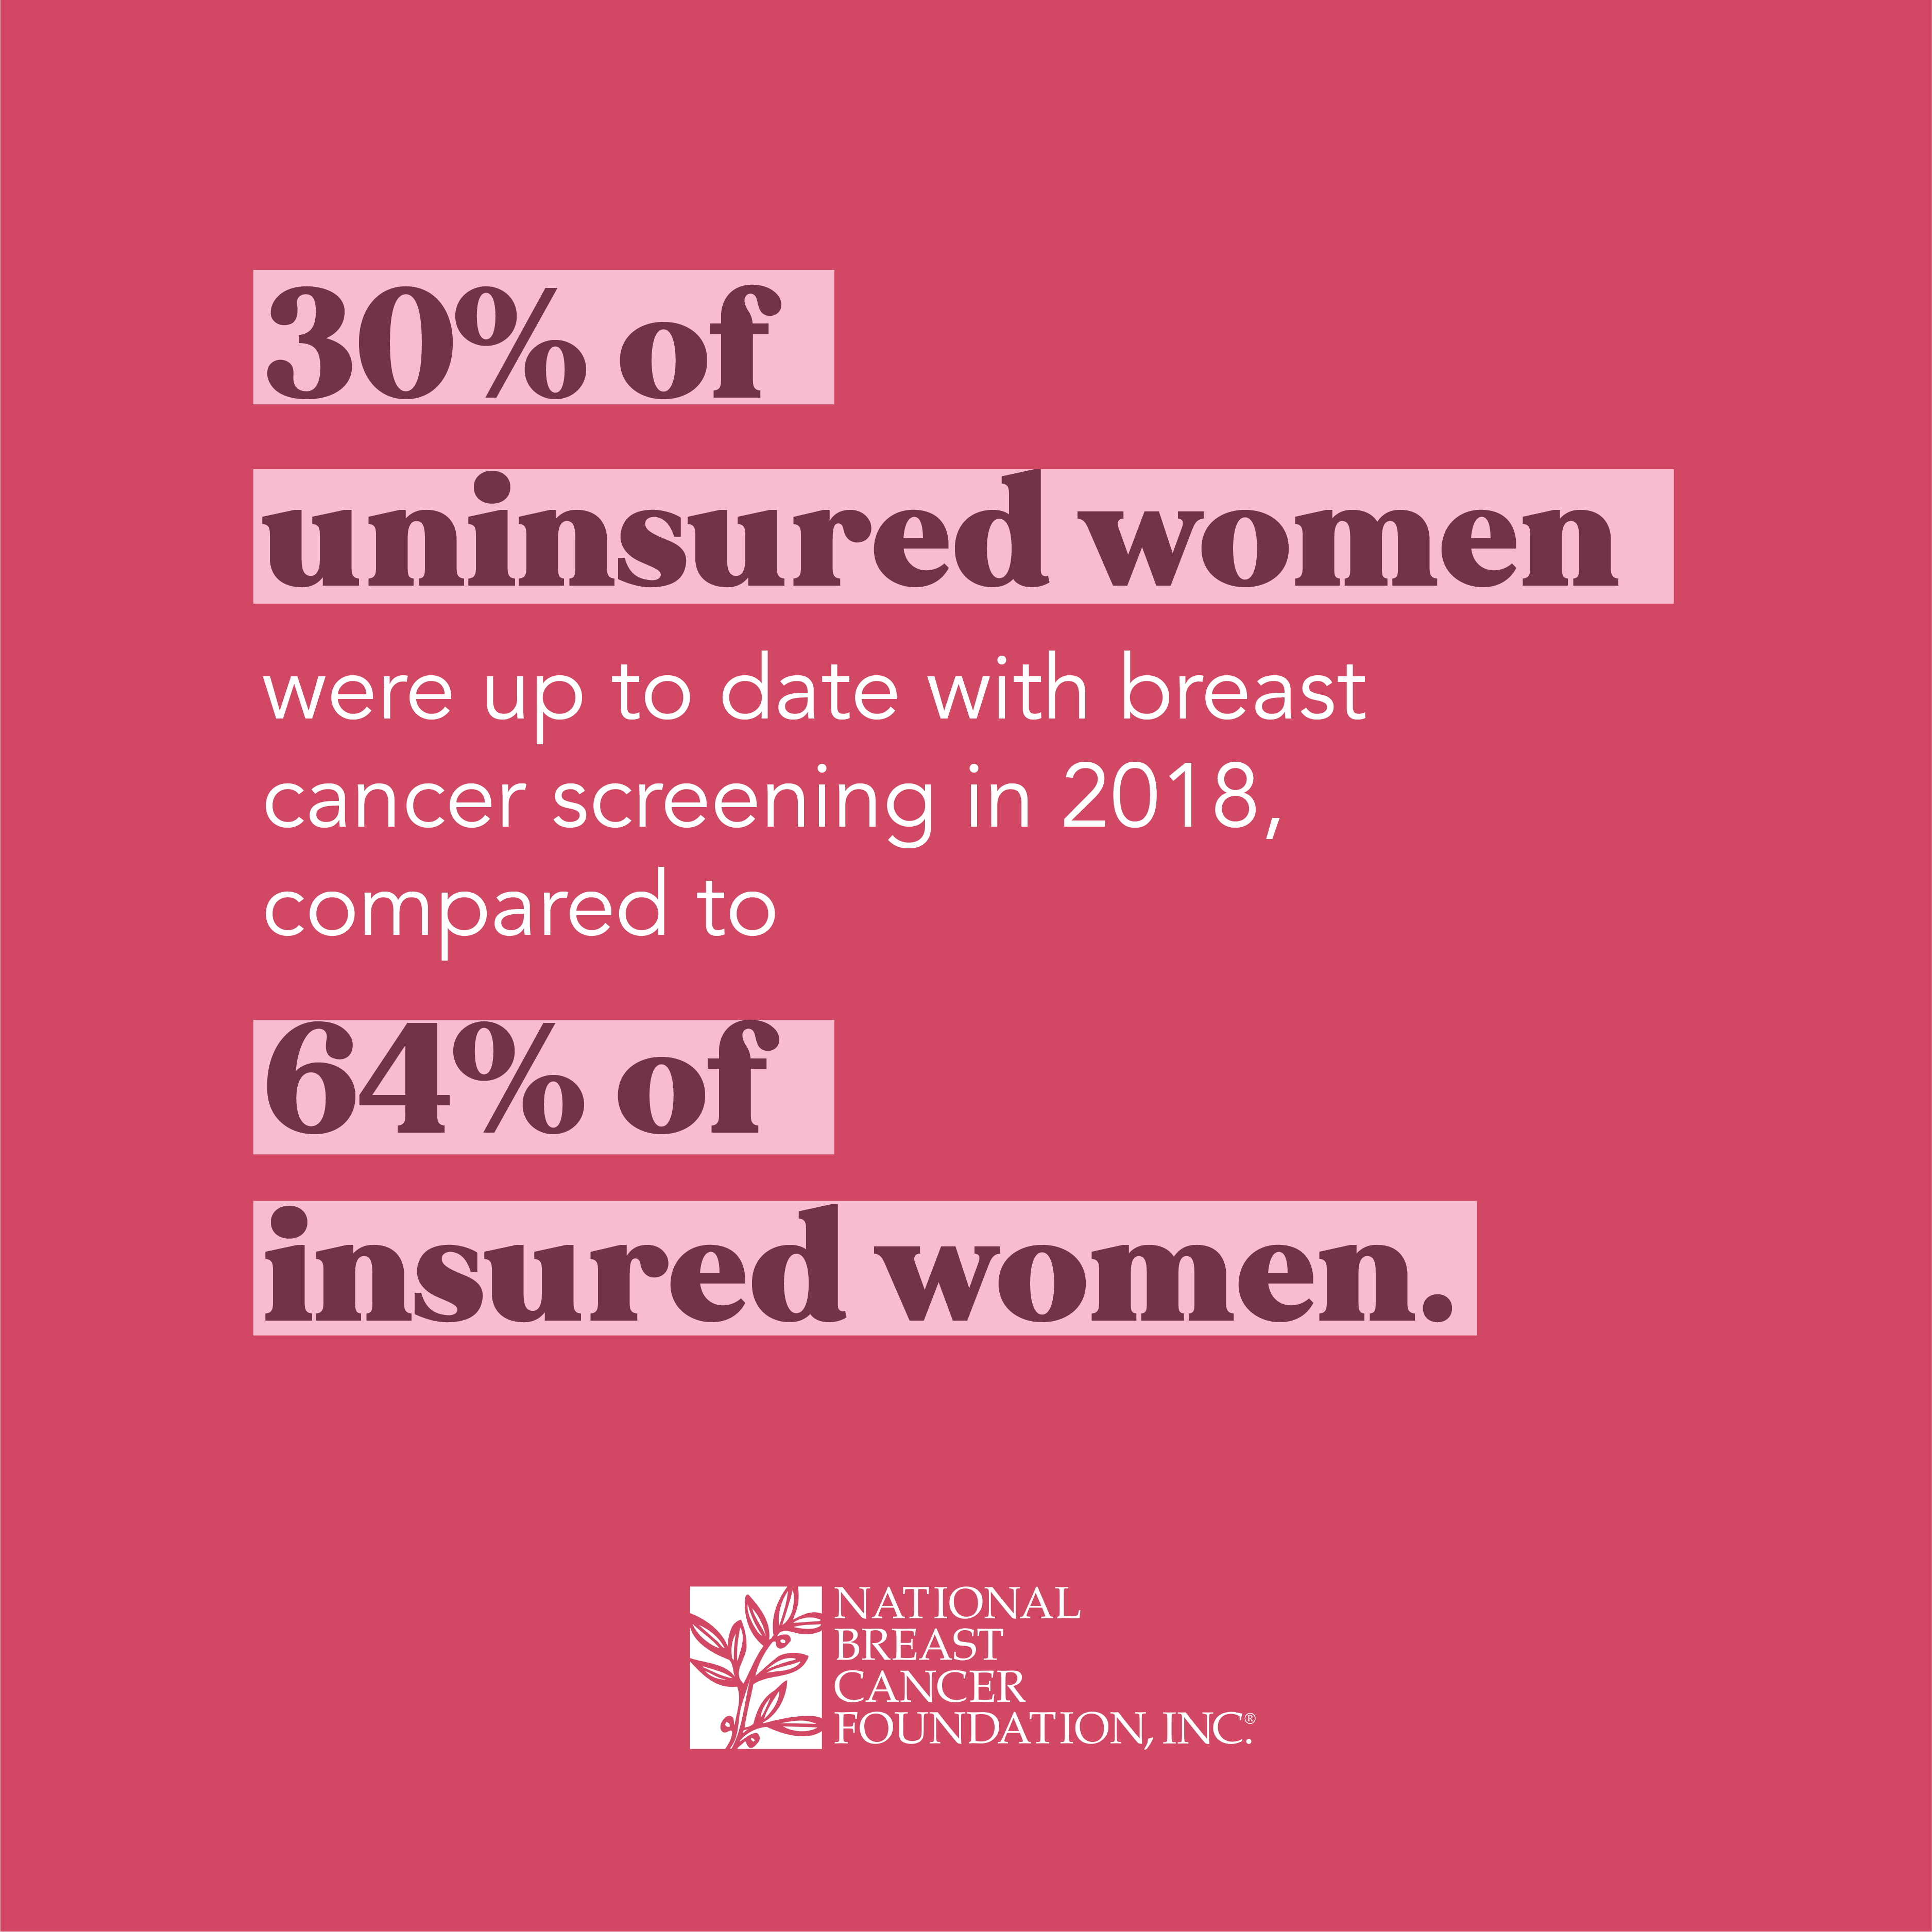 Only 30 percent of uninsured women were up to date with breast cancer screening in 2018